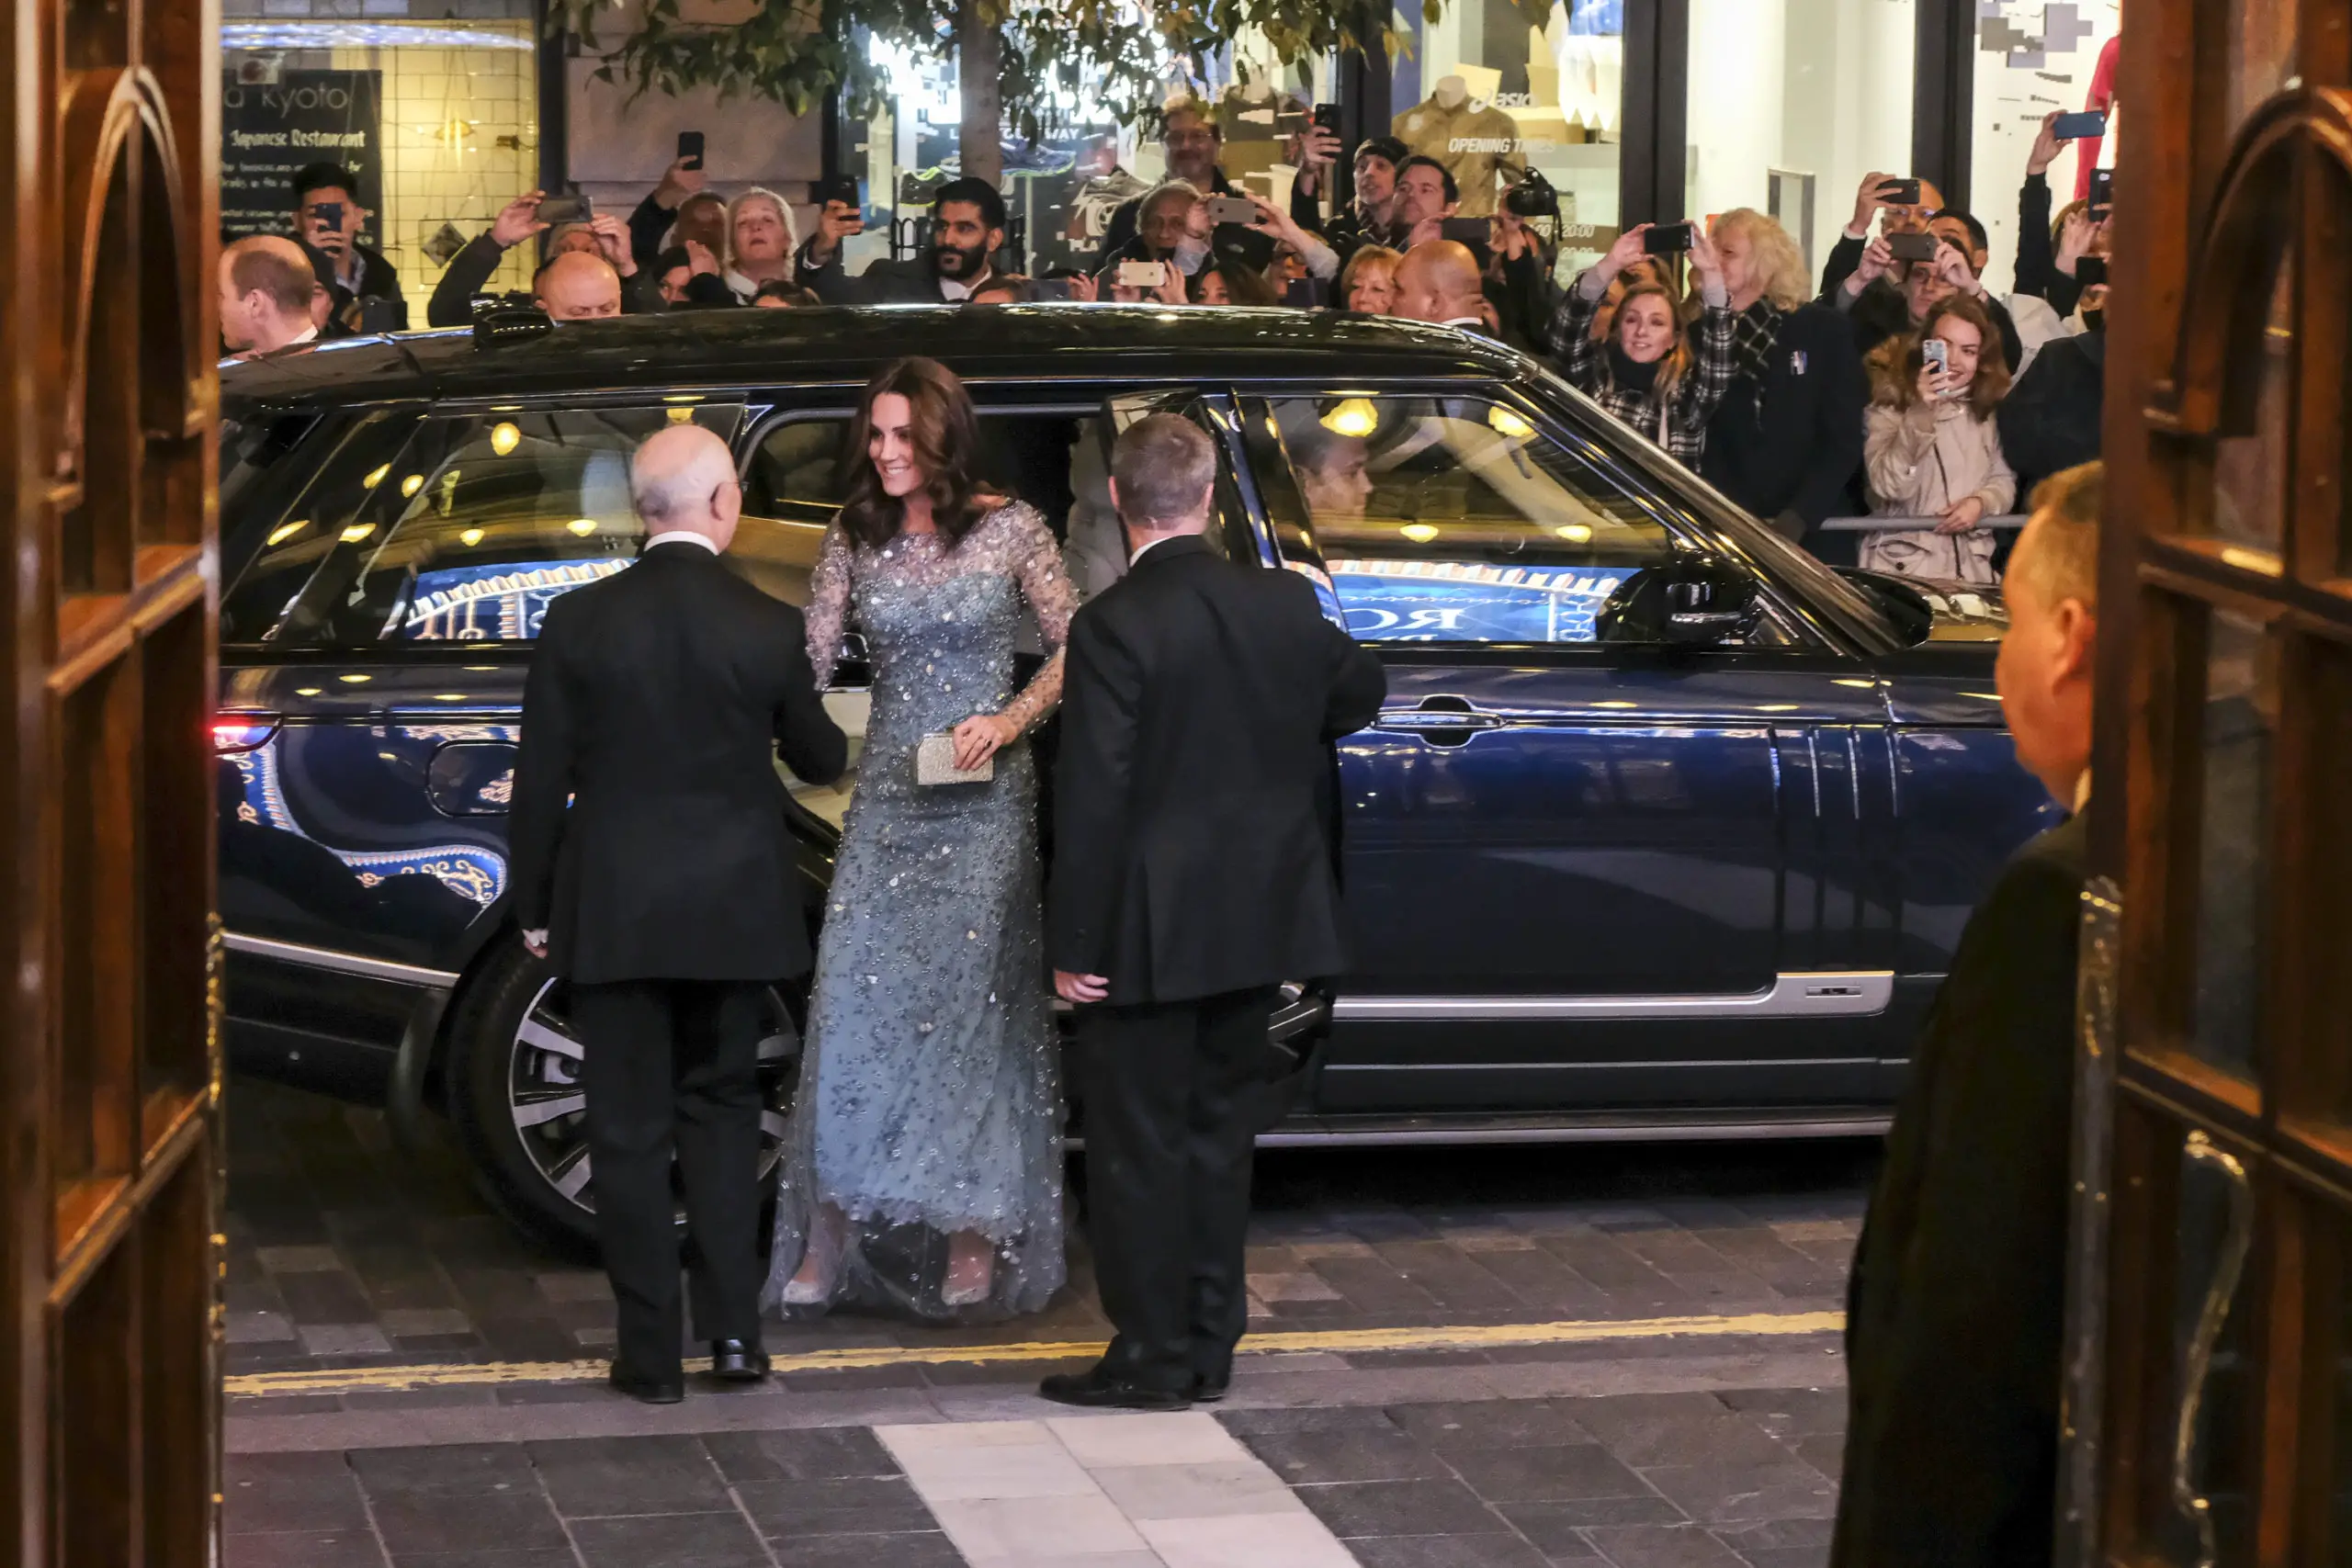 The Duchess of Cambridge dazzled in blue gown at the Royal Variety Performance